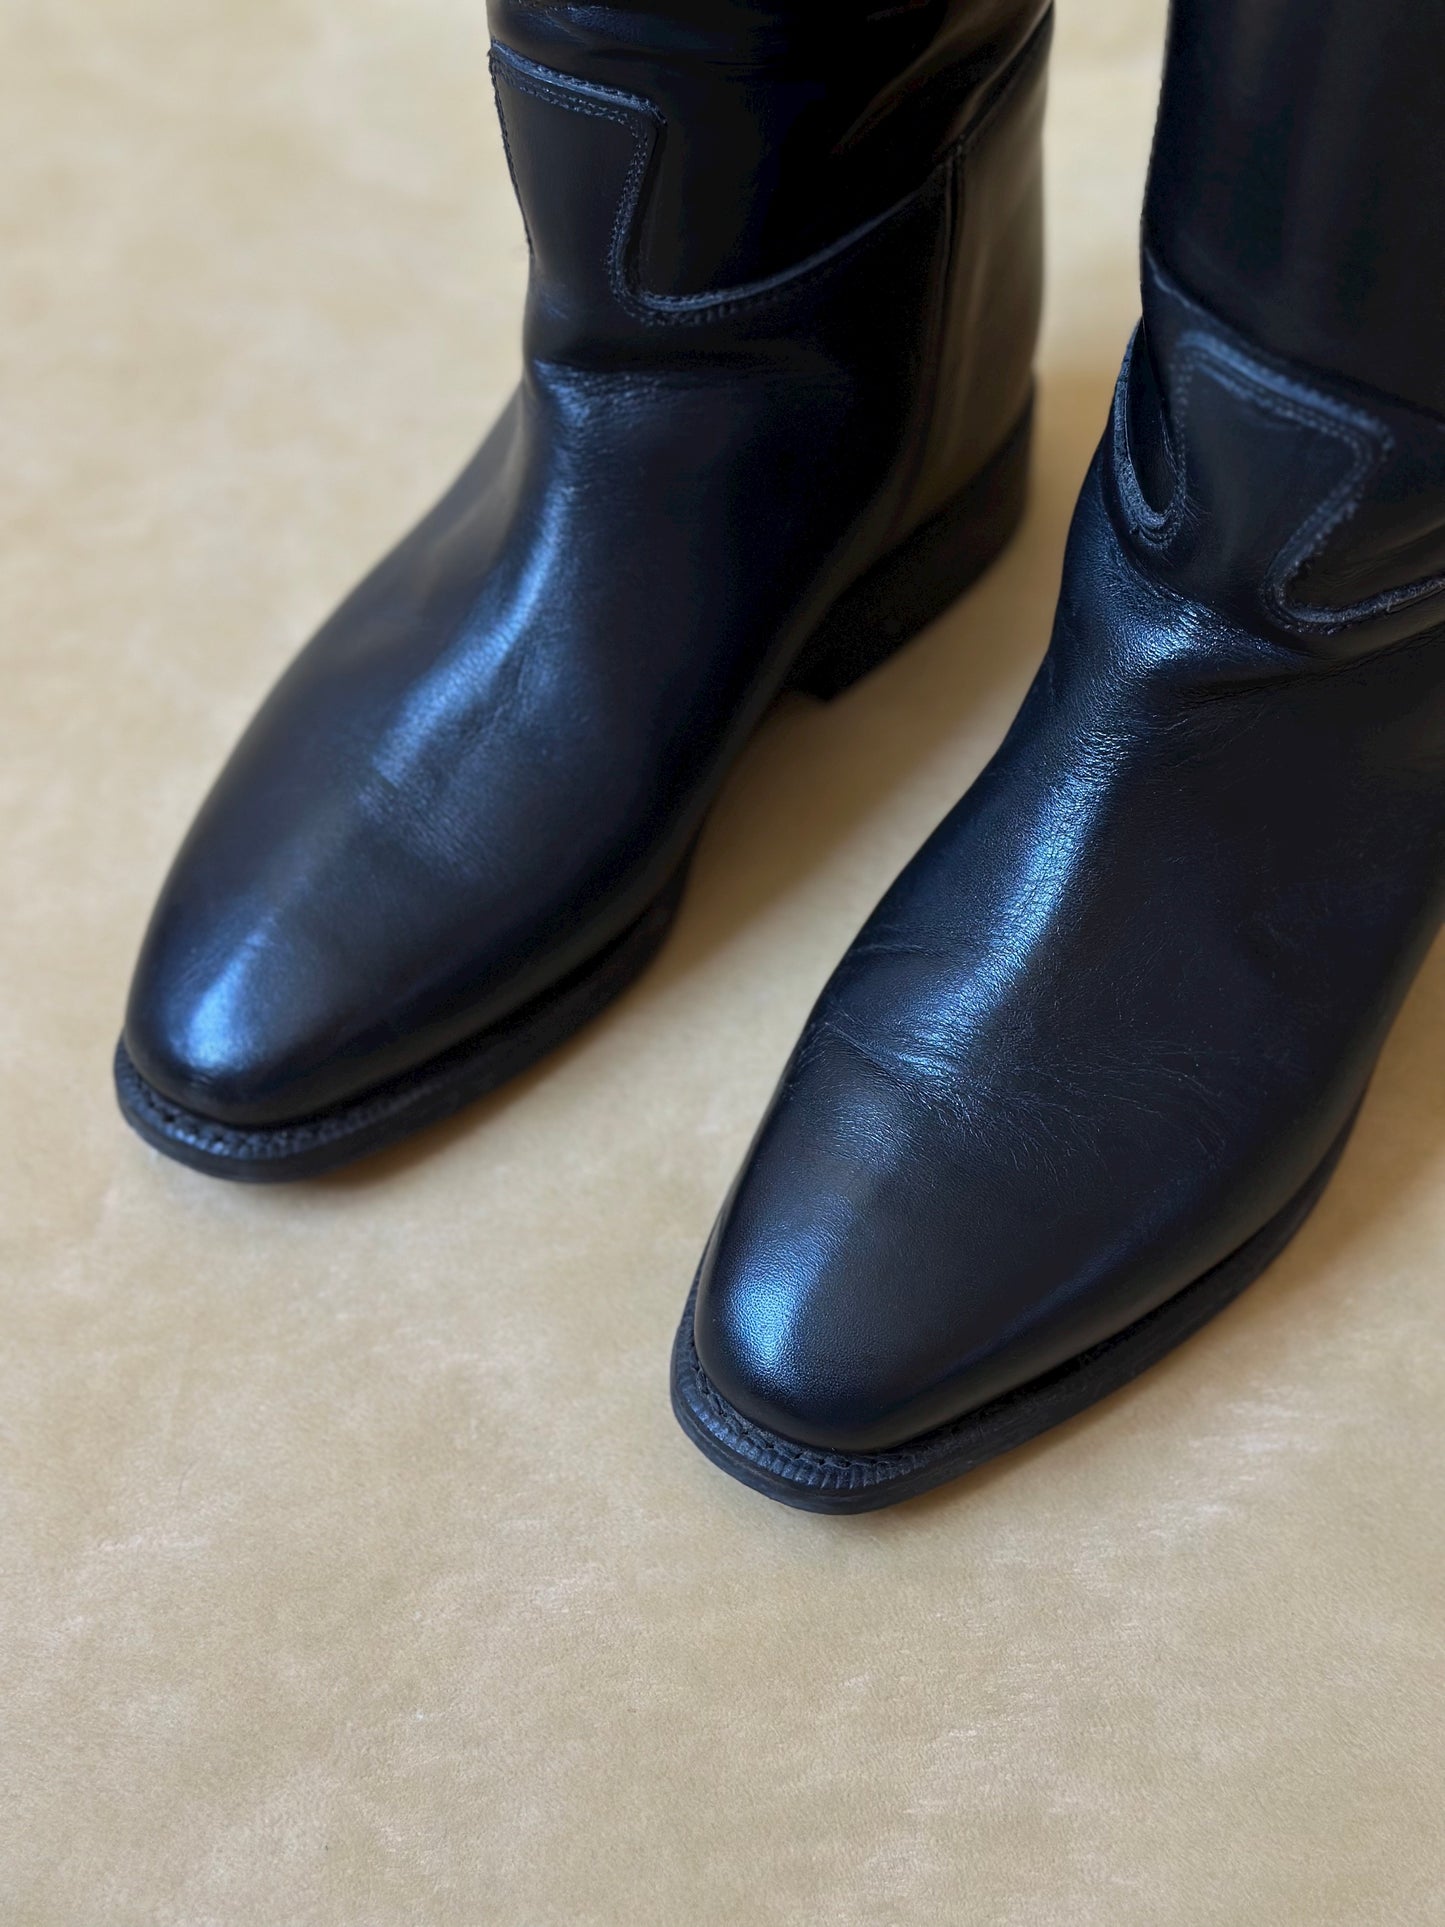 Vintage Black Leather Riding Boots n. 37 IT